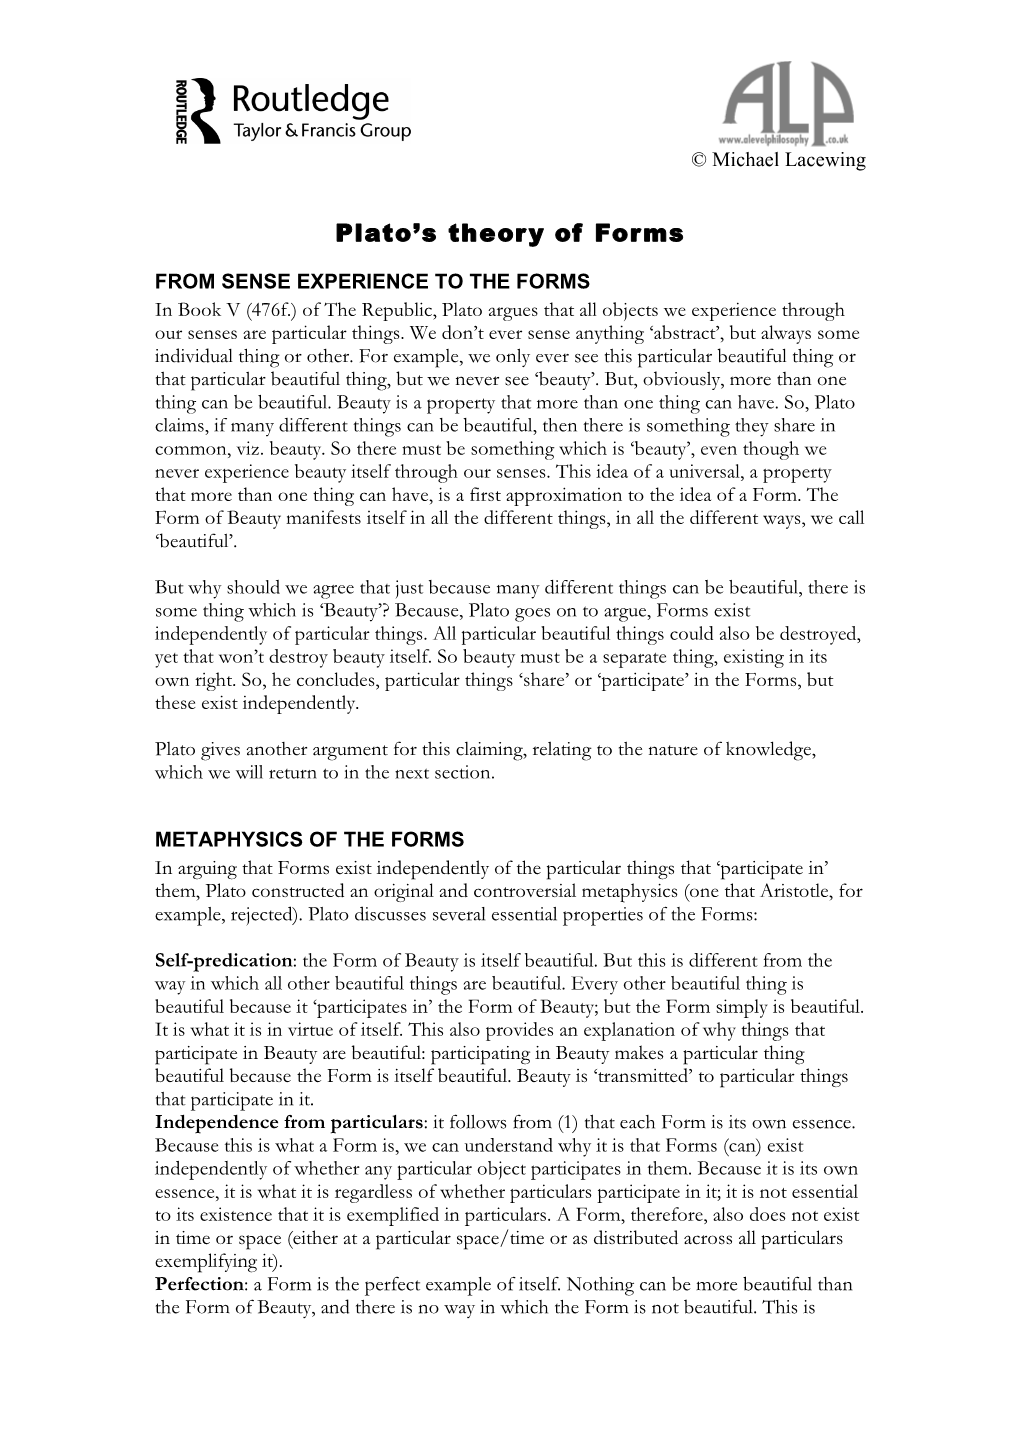 Plato's Theory of Forms